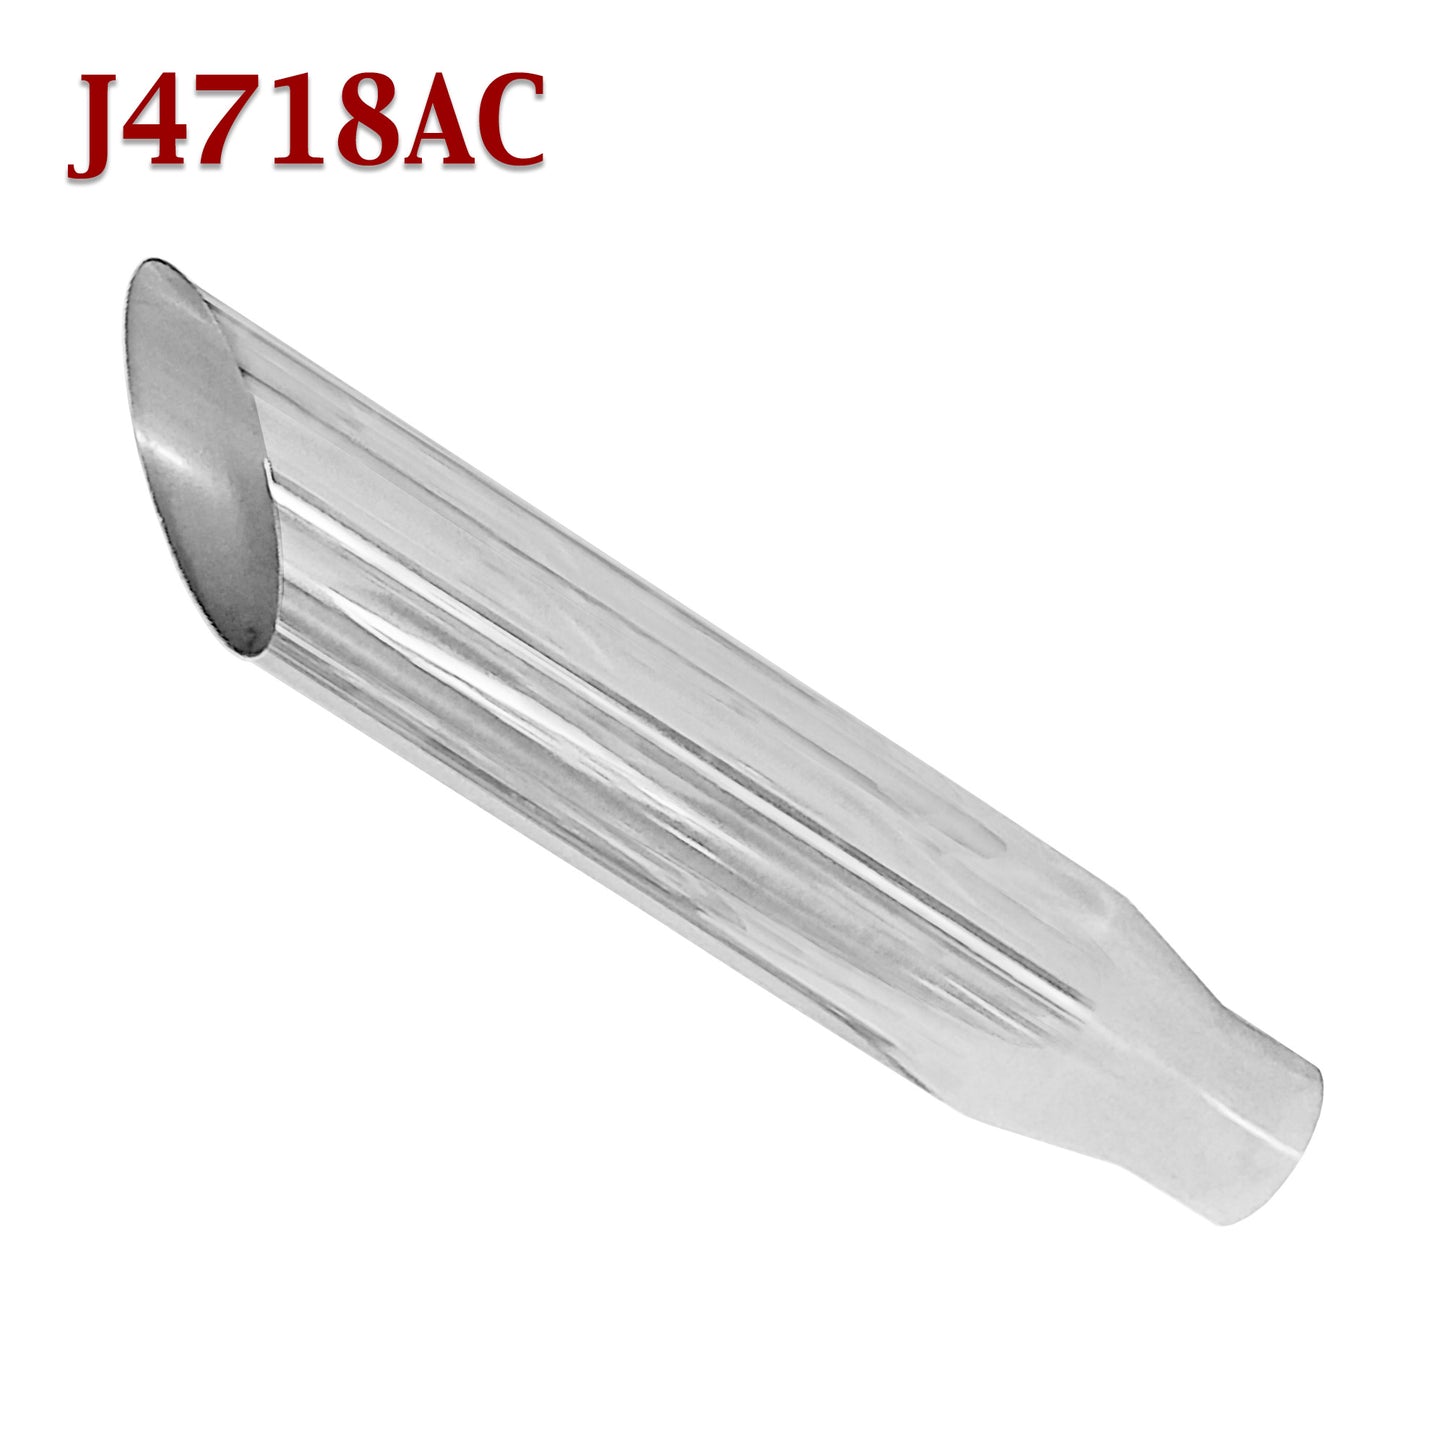 J4718AC 2.25" Stainless Round Exhaust Tip 2 1/4" Inlet 3 1/2" Outlet 18" Long